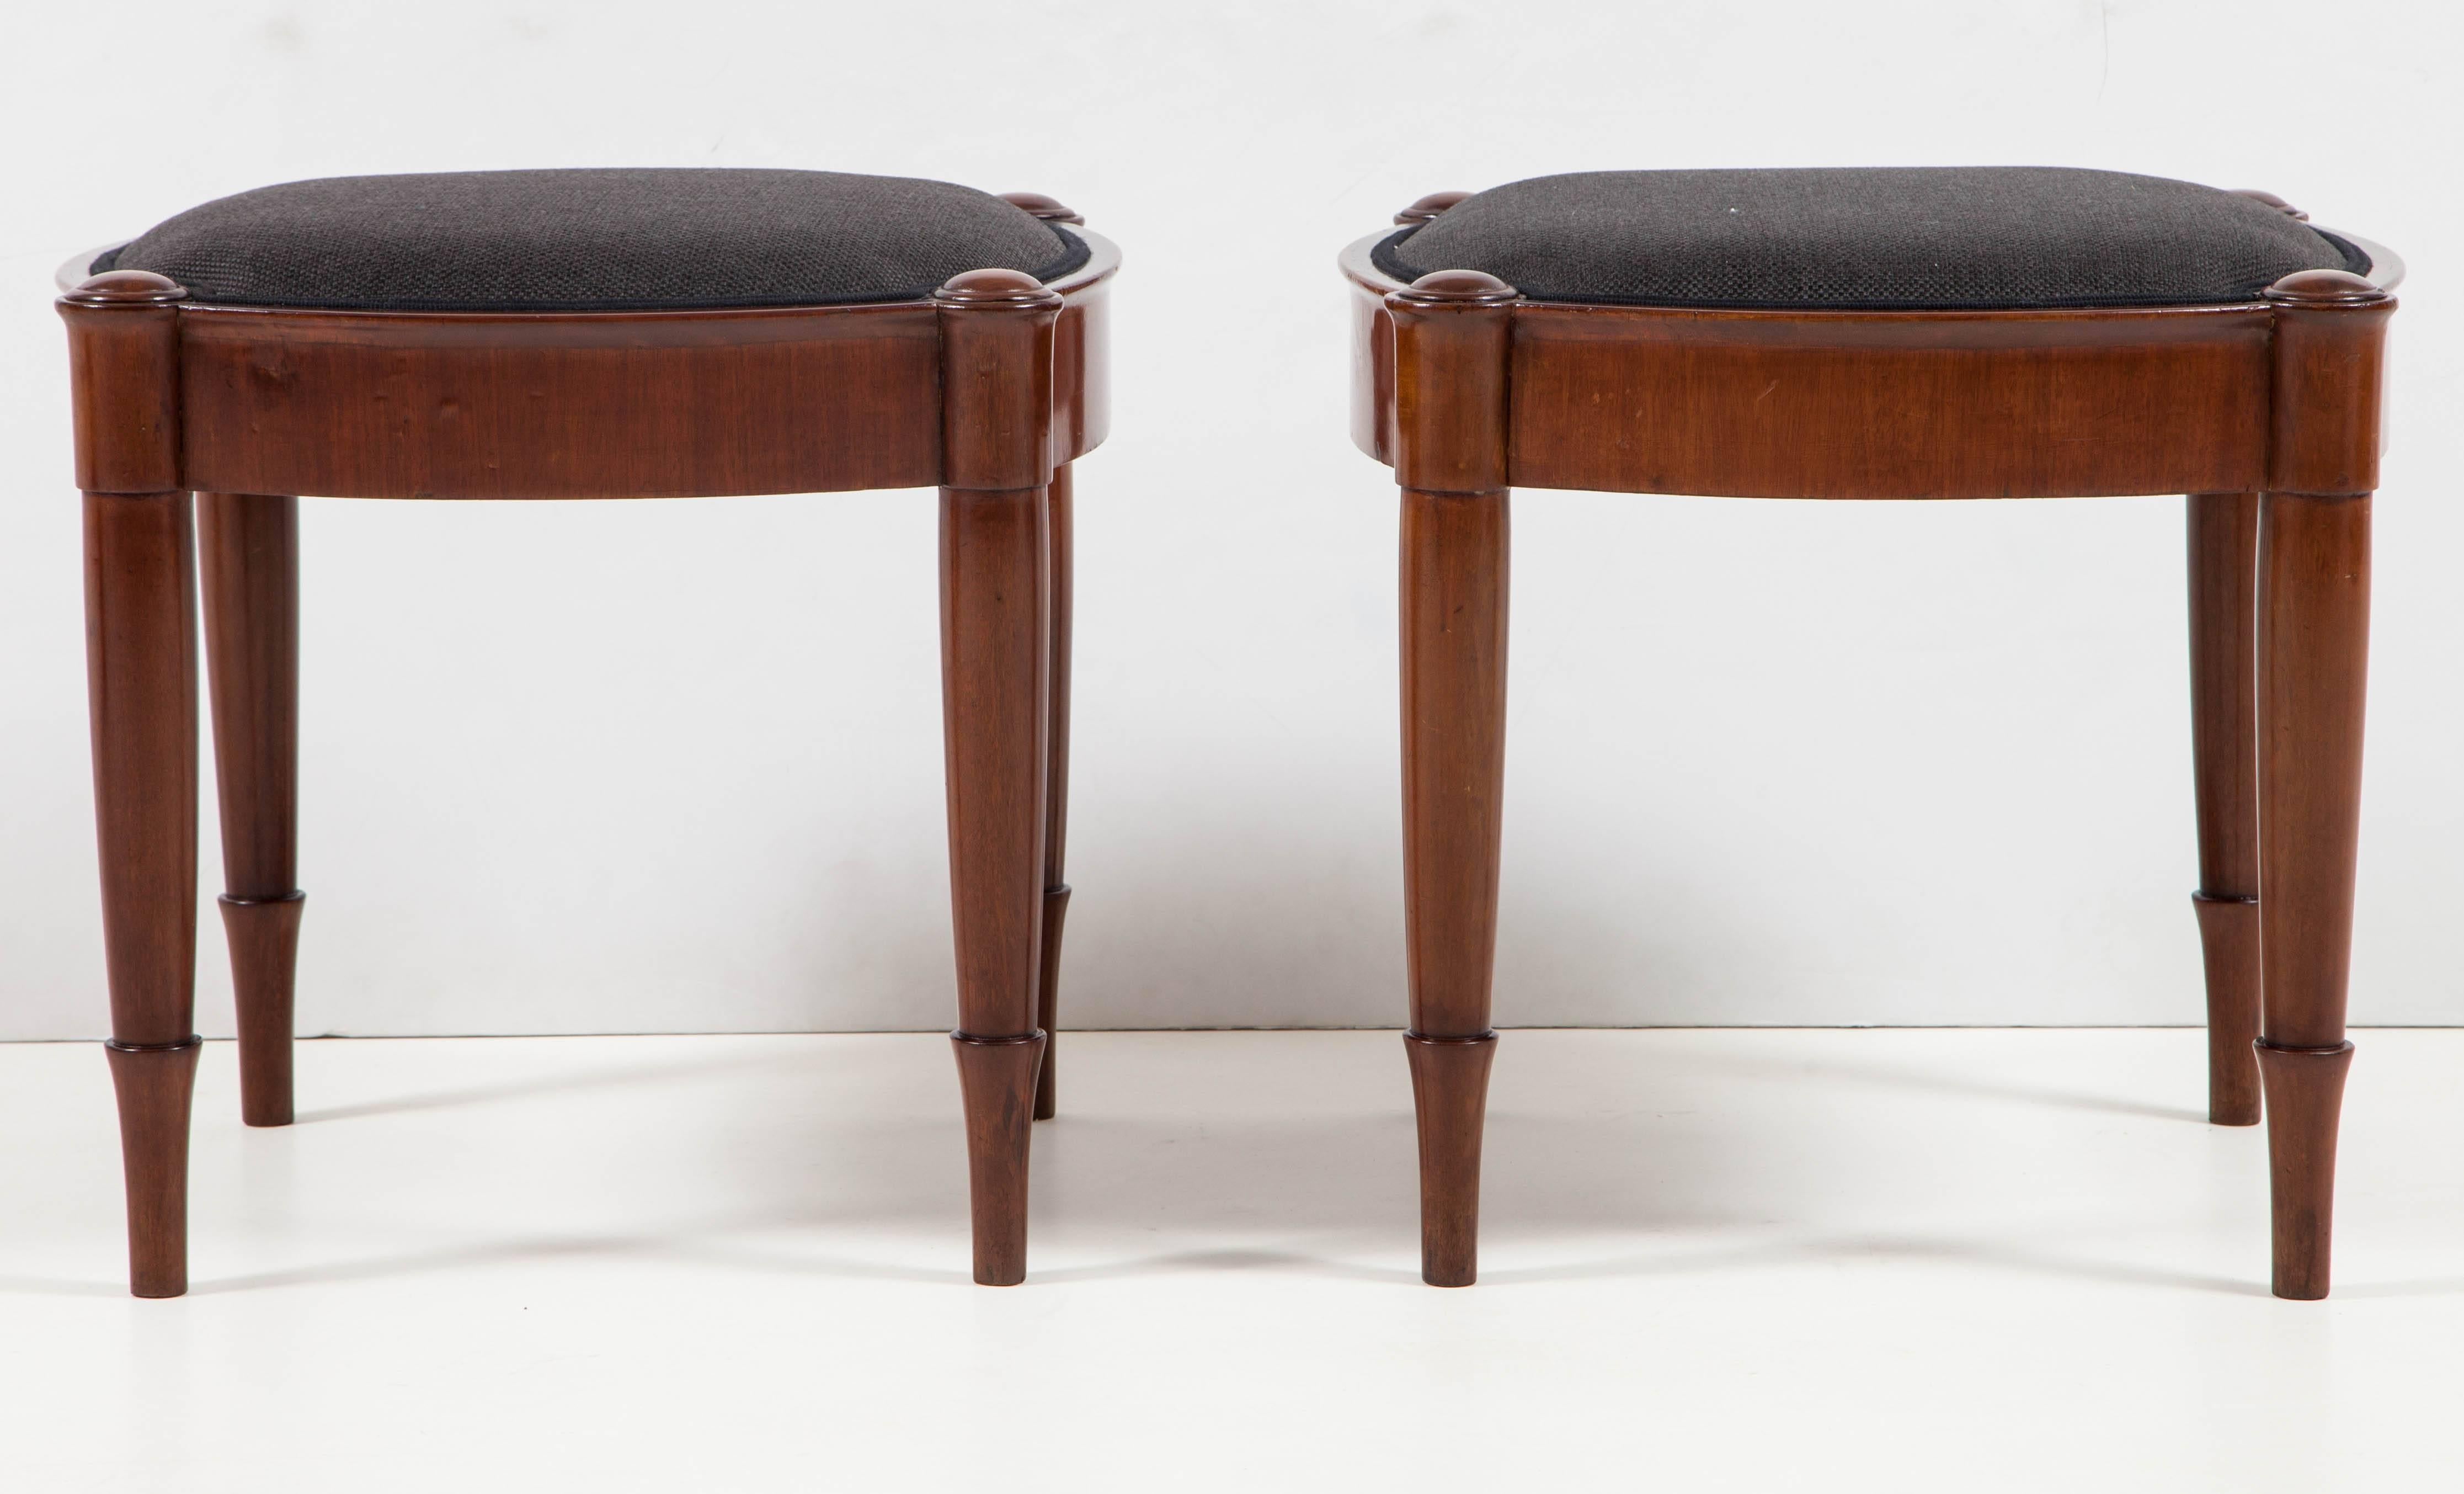 A pair of Danish neo-antique mahogany stools probably designed by the sculptor Herman Wilhelm Bissen, circa 1850s, with tight upholstered seats and a convex sided frame raised on a simple variation of the 